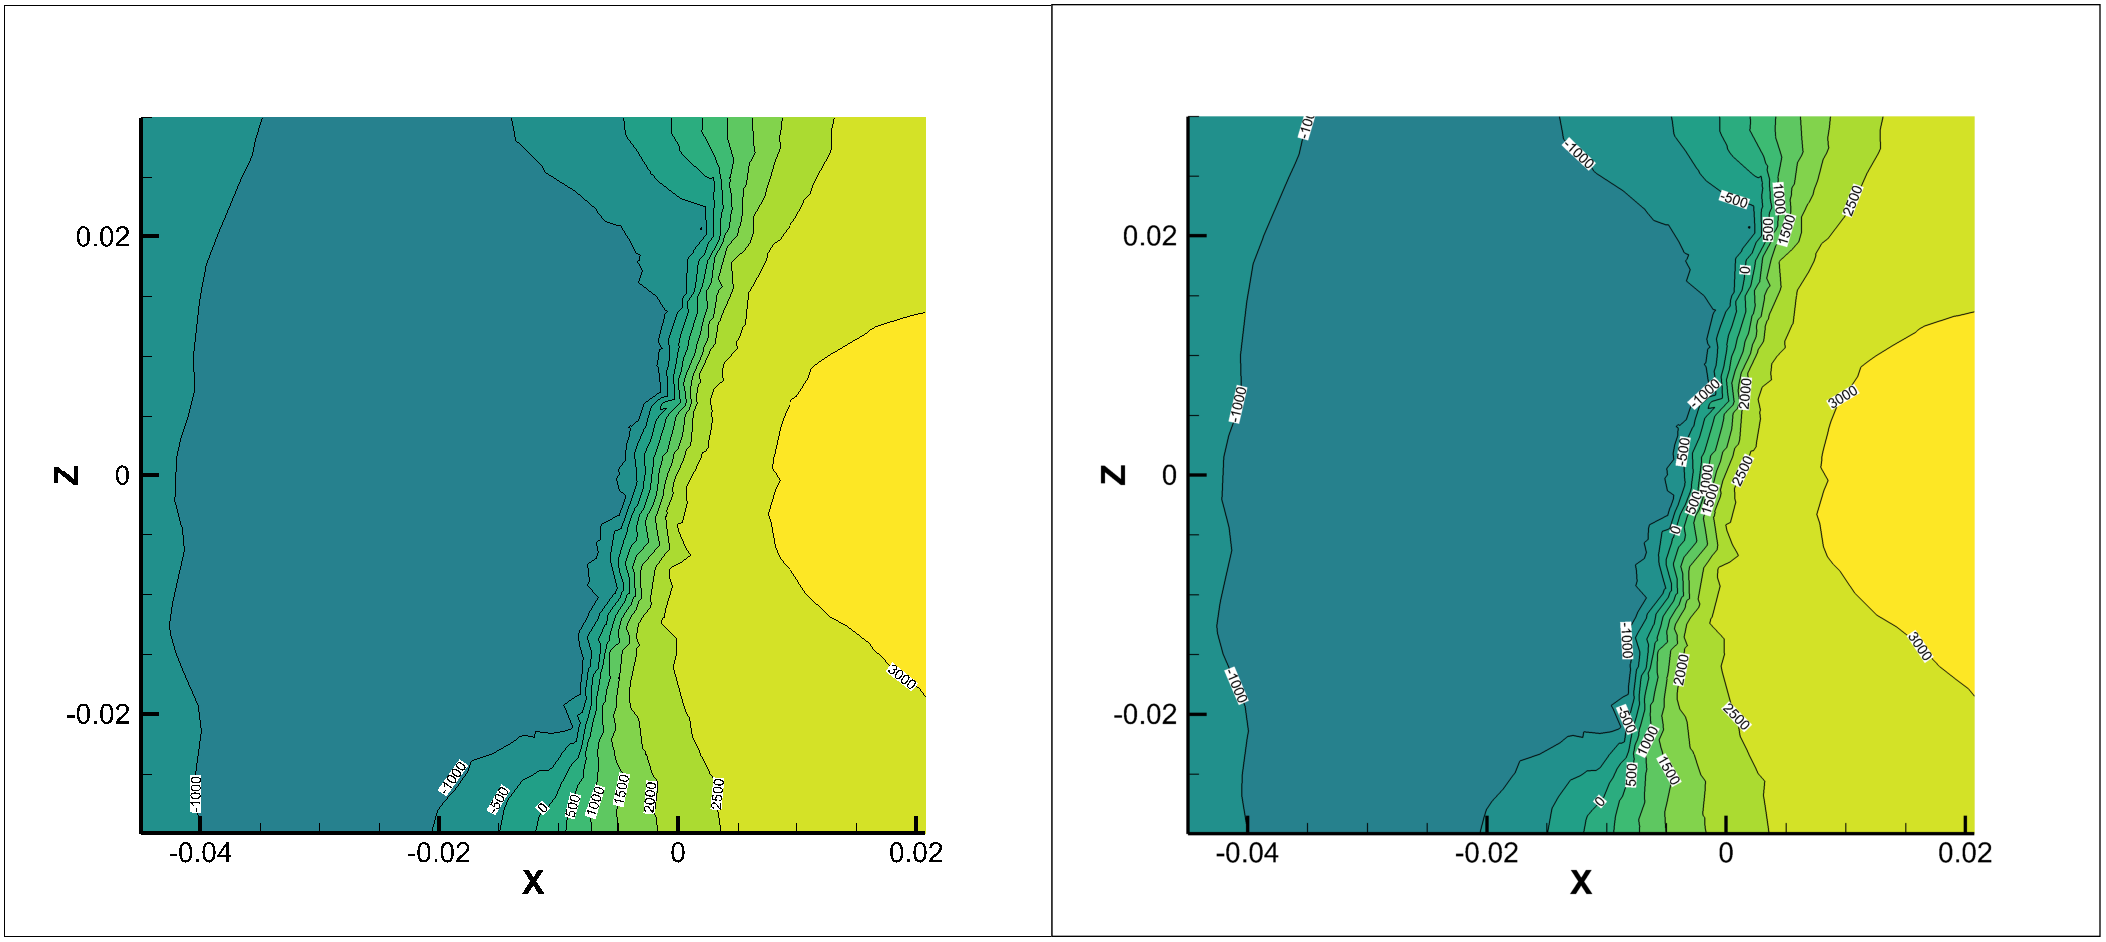 On-screen VS image export of a plot using contour labels